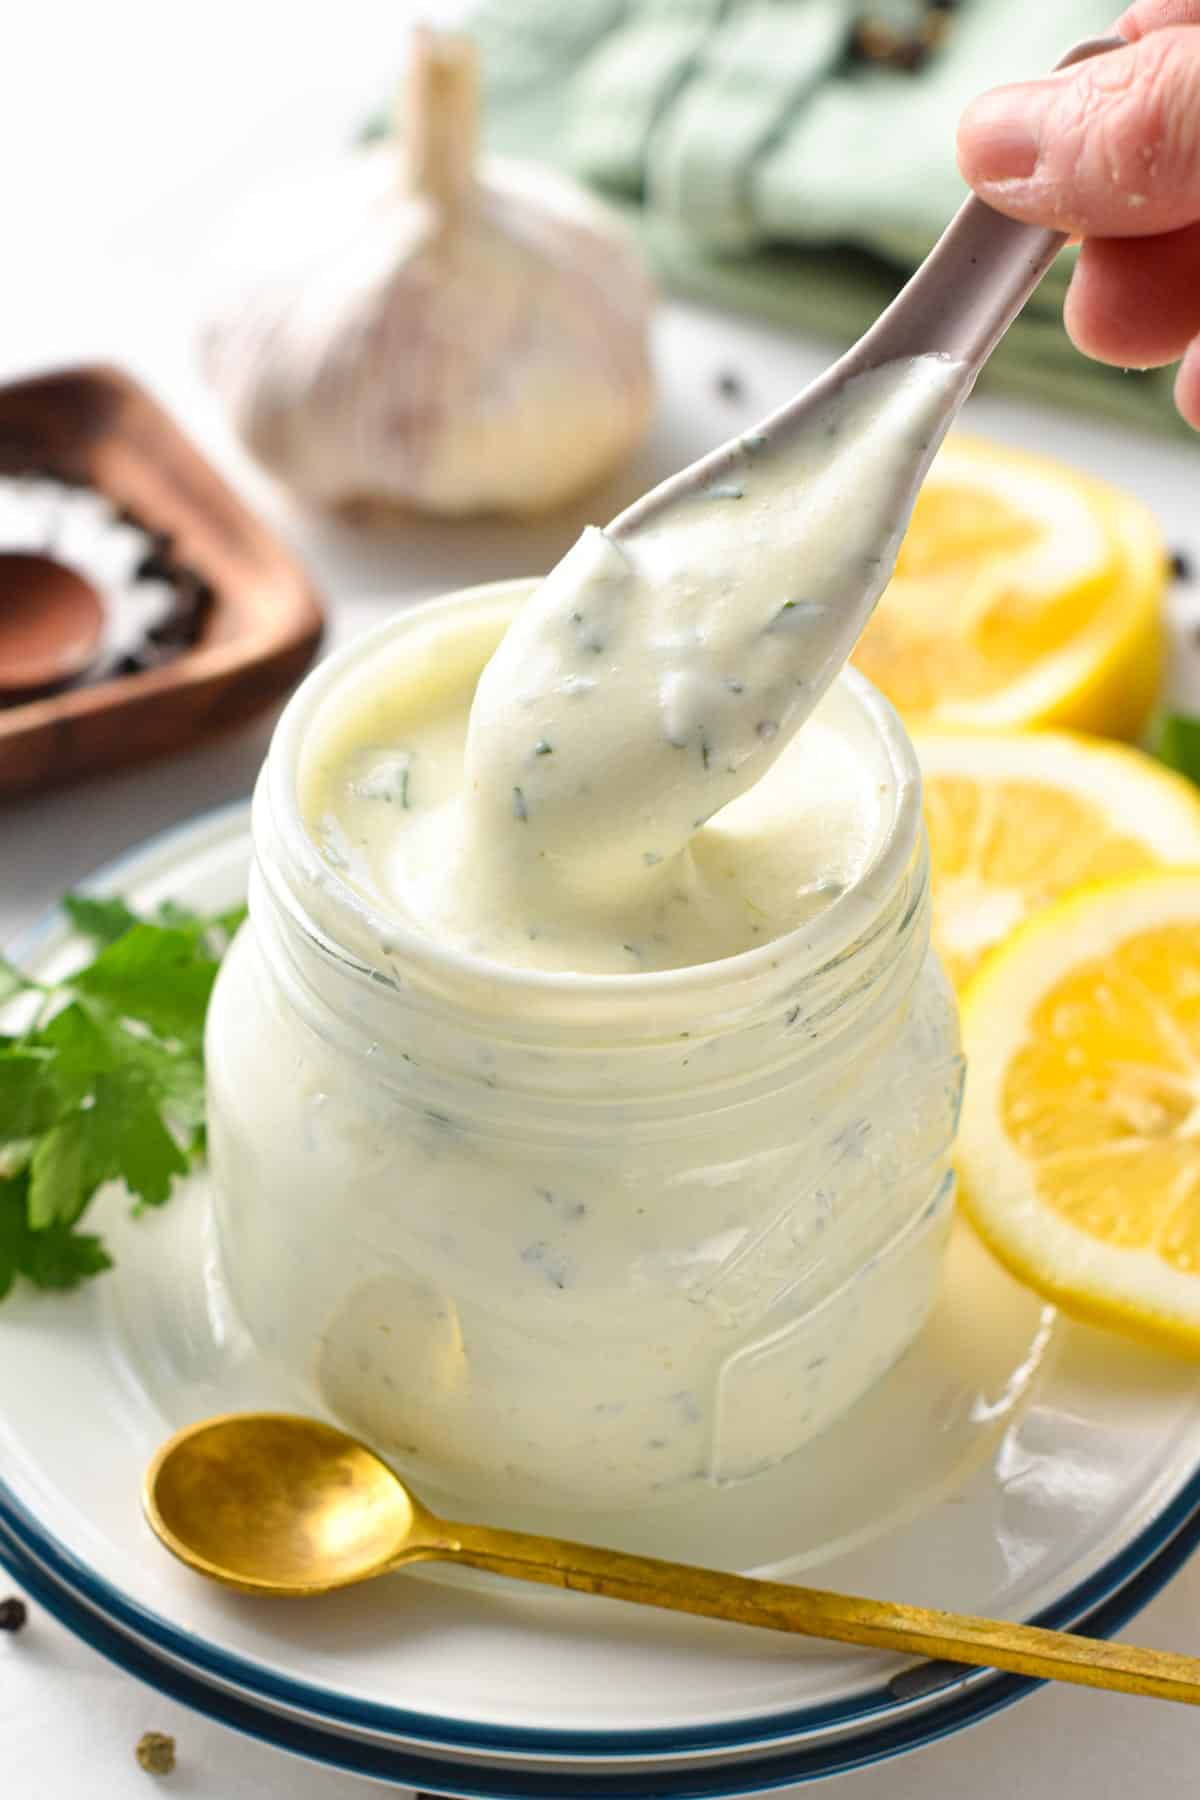 This Greek Yogurt Dressing is a creamy, high-protein salad dressing perfect to add creaminess and rich texture to any lettuce or salad. It's a healthier salad dressing too, with less calories, fat and packed with calcium and filling proteins.